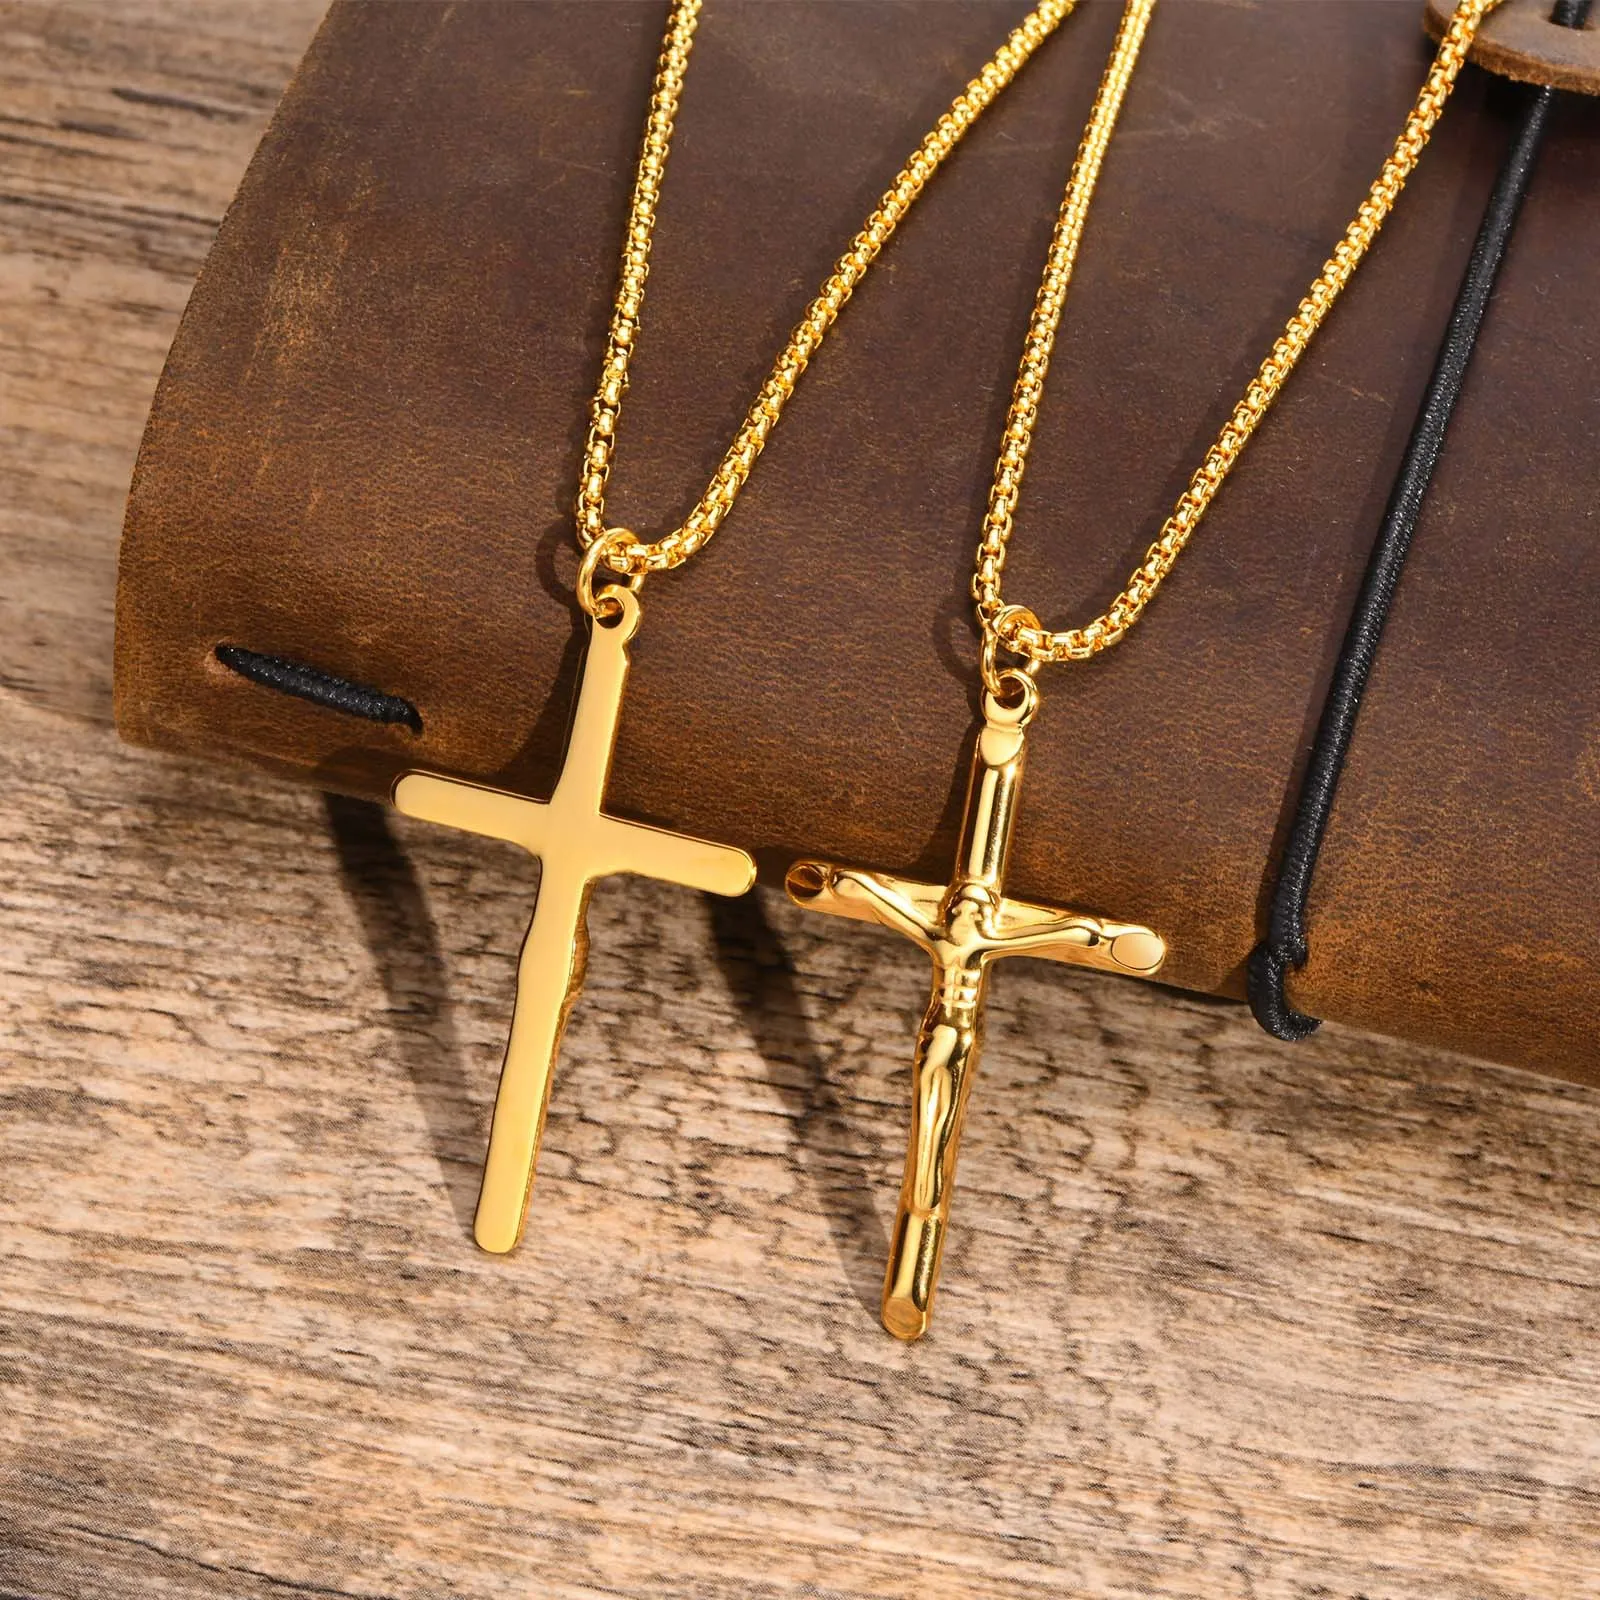 Jesus Christ Cross Pendant Necklace for Men Stainless Steel Crucifix Catholic Religious Prayer Jewelry Women Gifts Wholesale